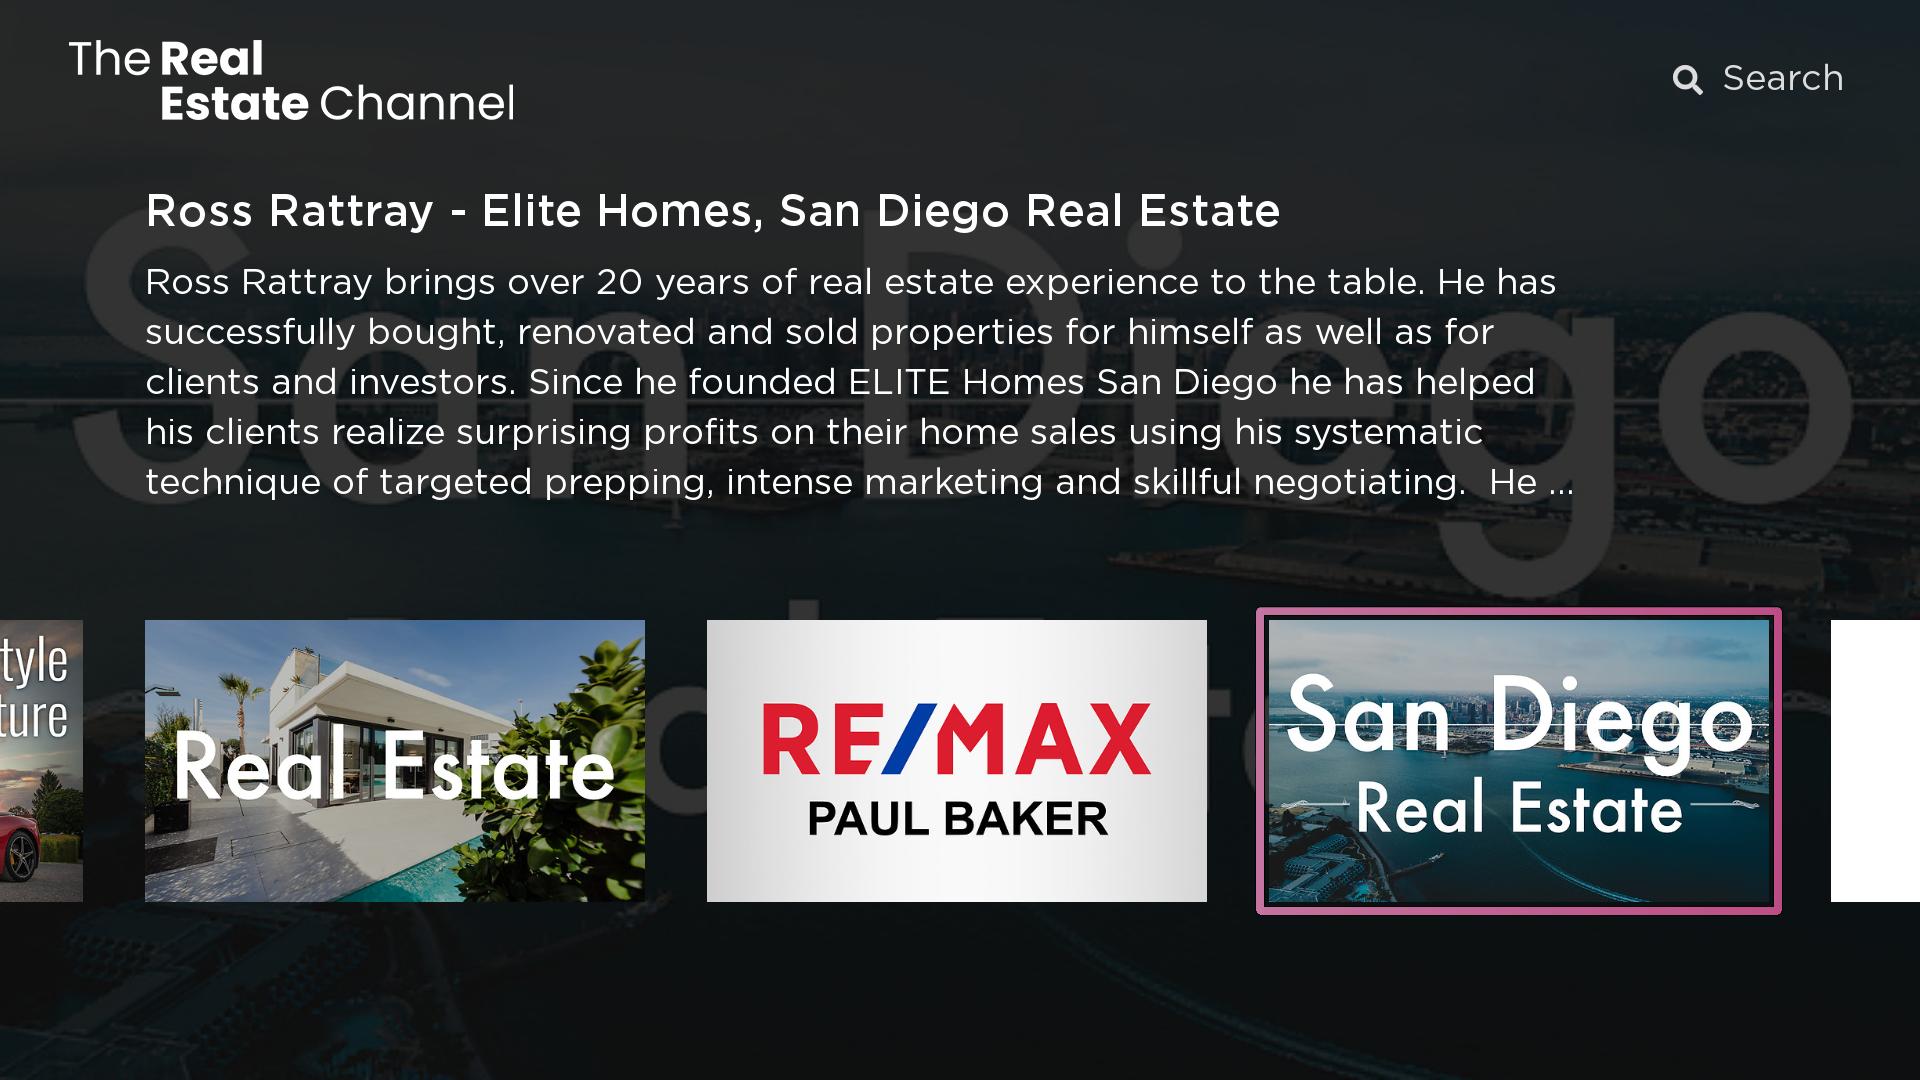 The Real Estate Channel Screenshot 002